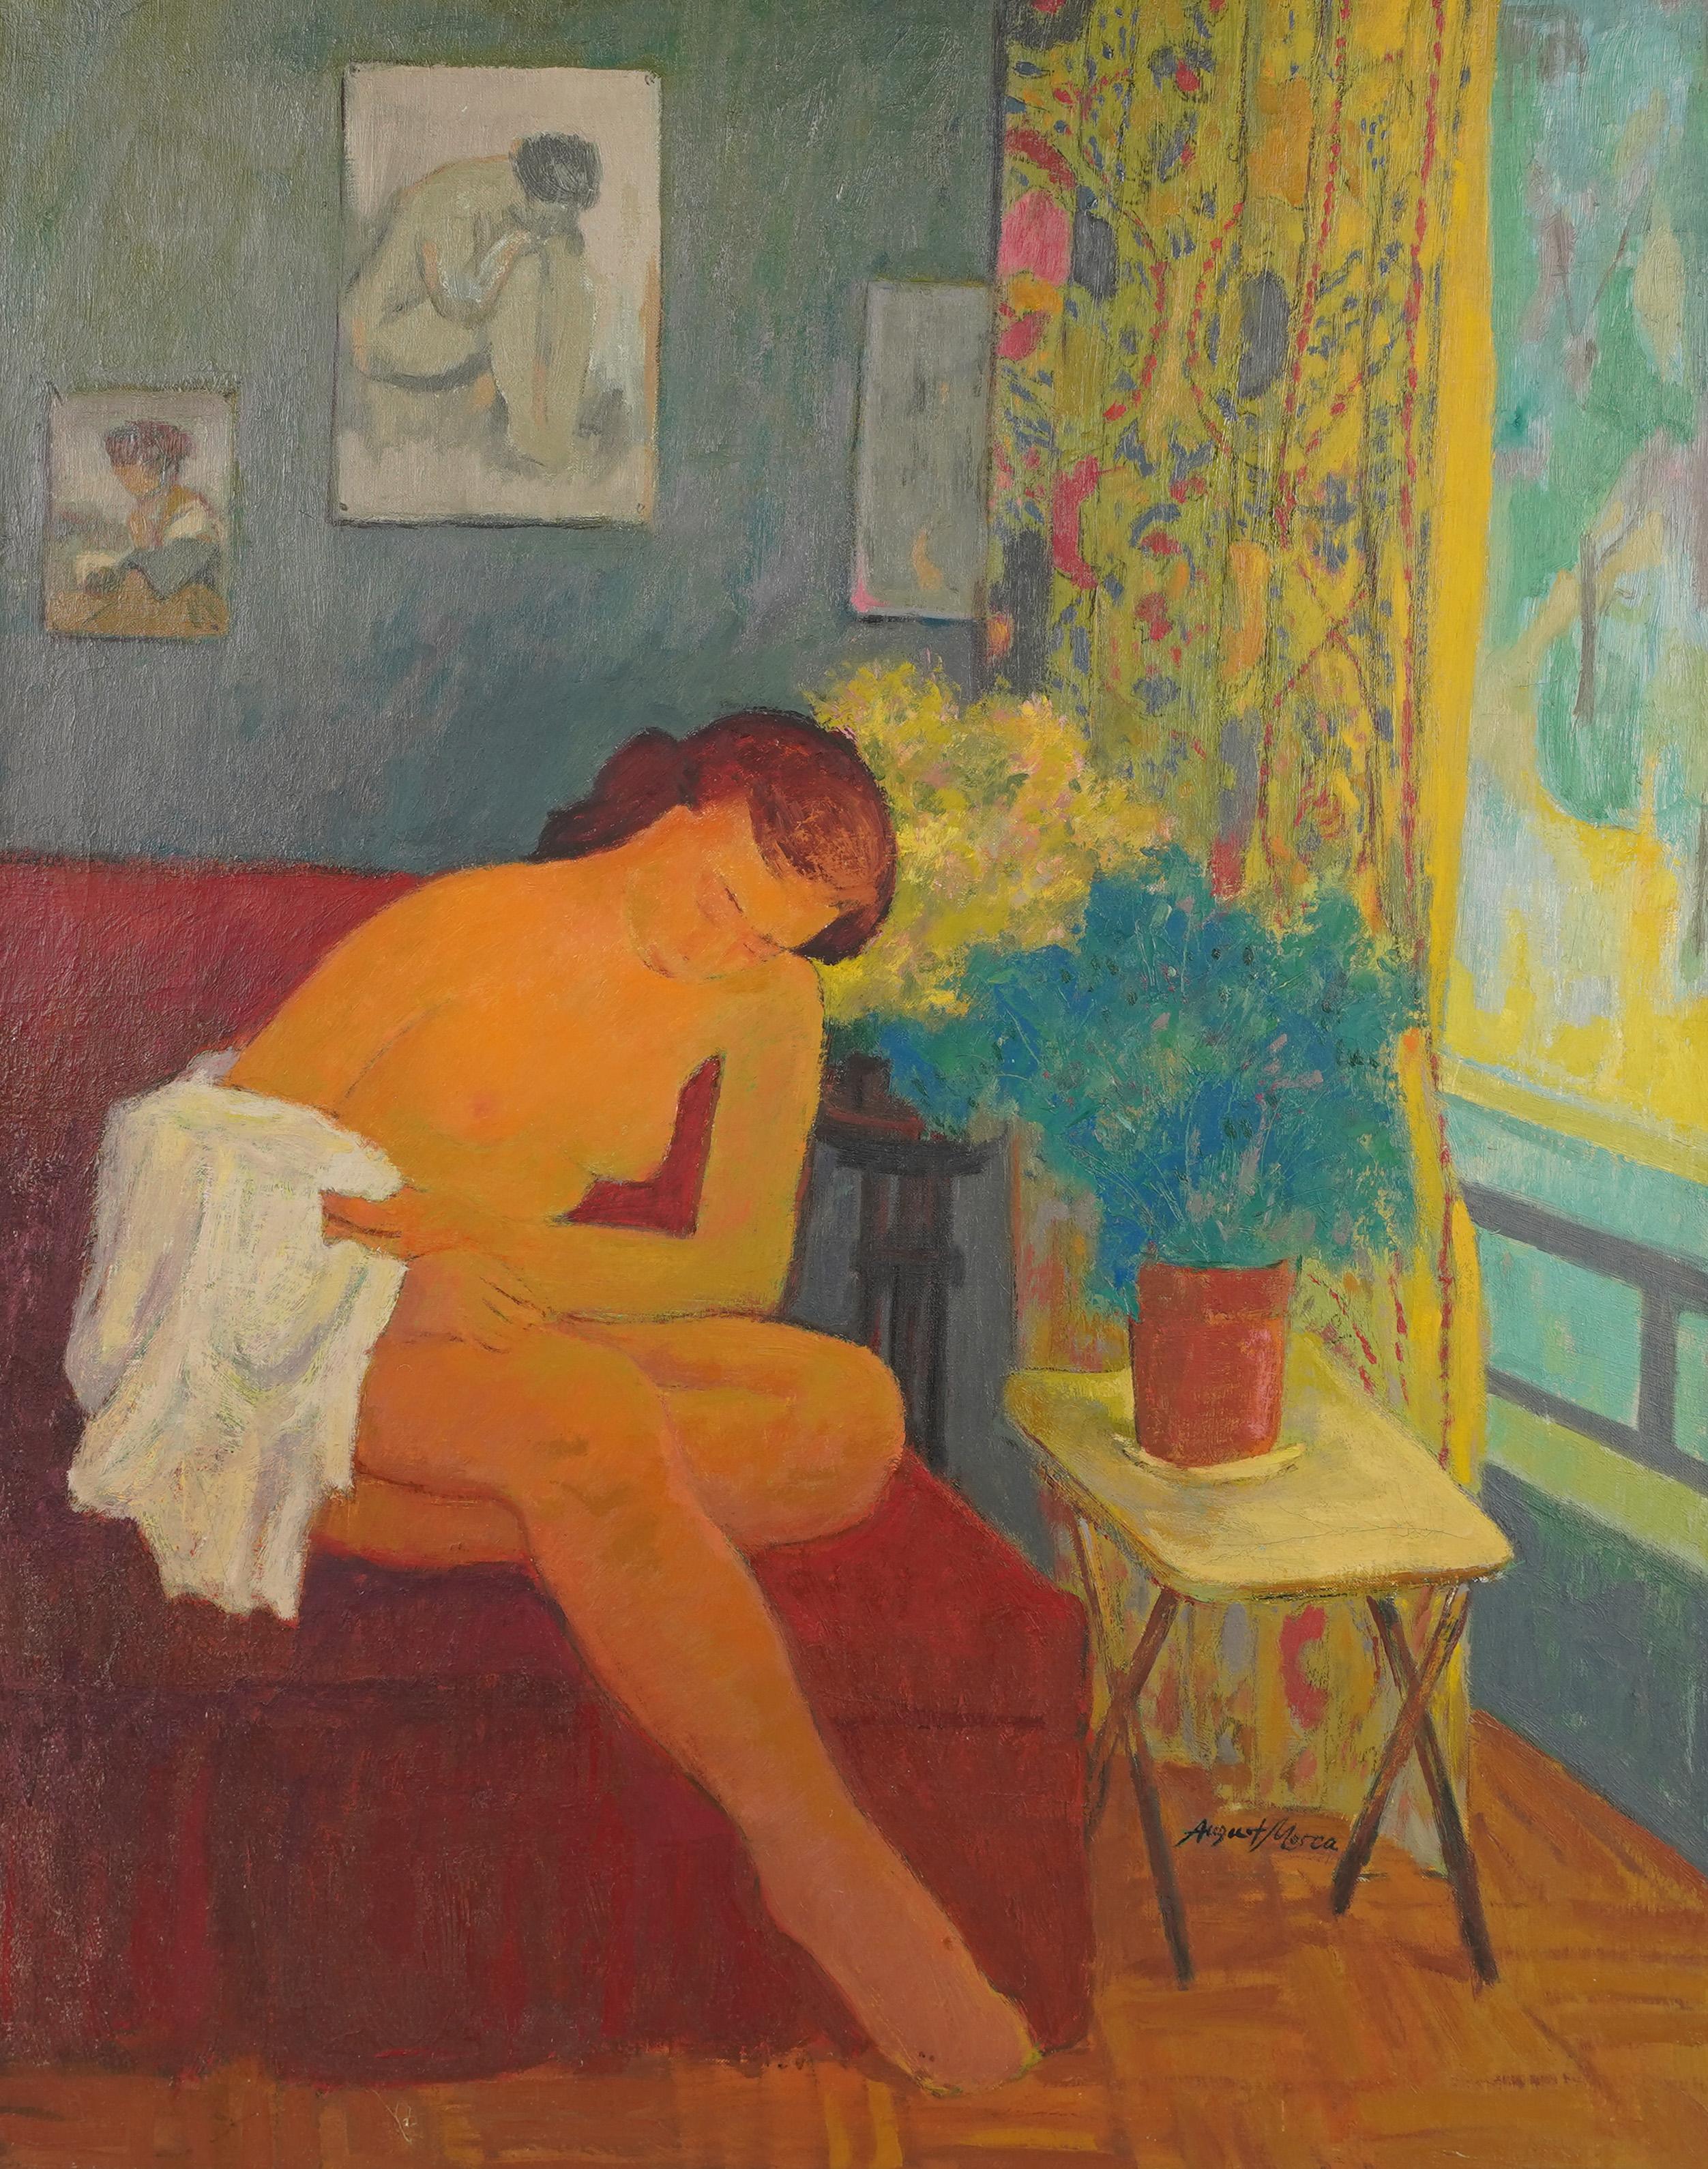 Vintage impressionist interior view with a nude portrait.  Oil on canvas.  Nicely framed in a period modern simple wood frame.  Image size, 28L x 36H.  Signed.
